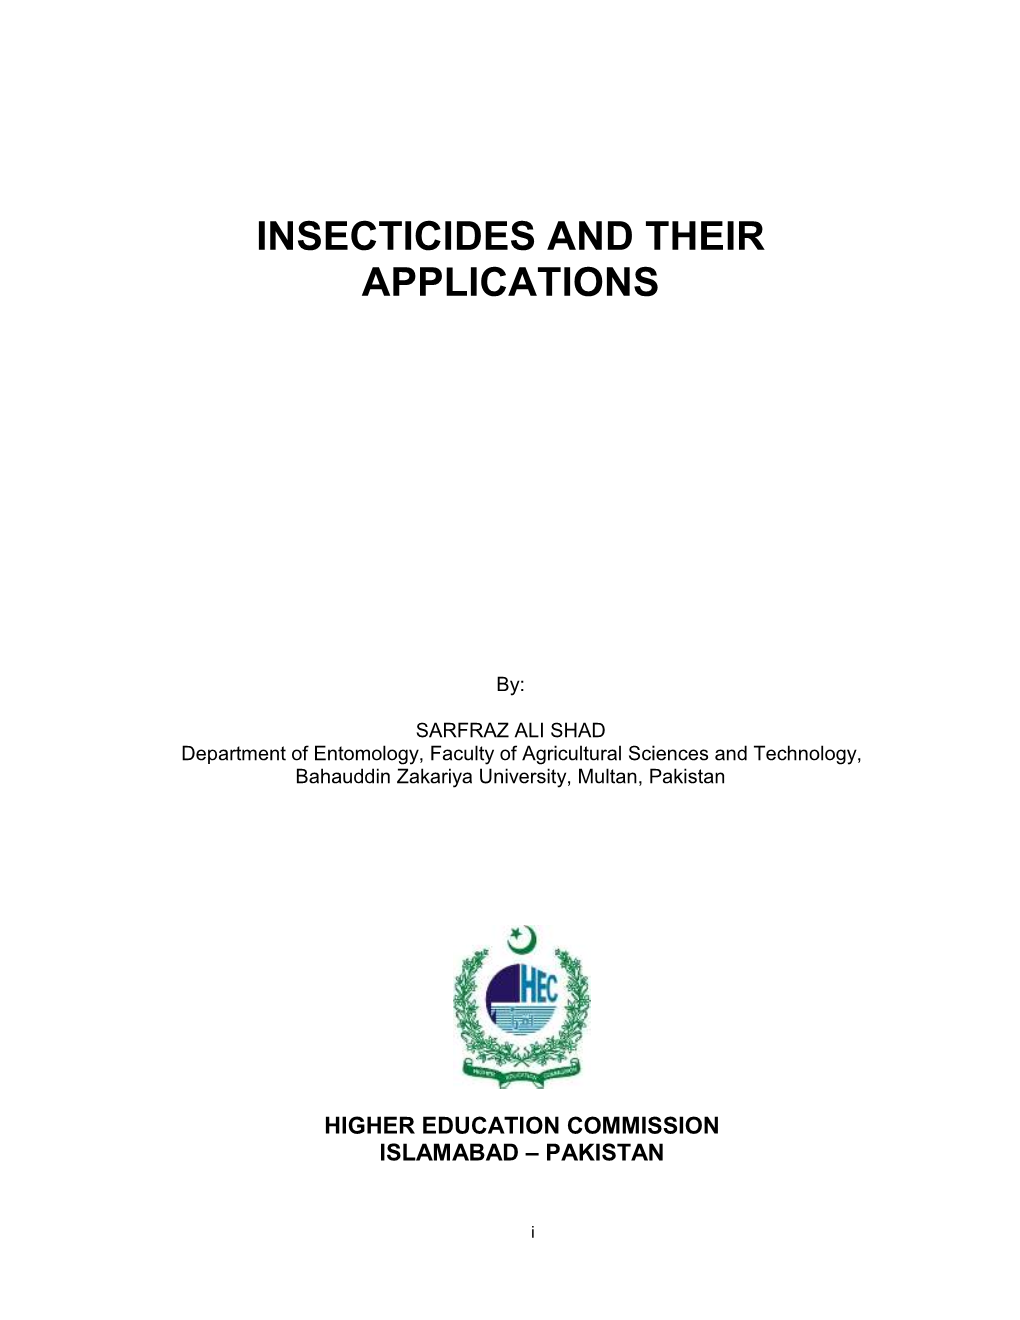 Insecticides and Their Applications